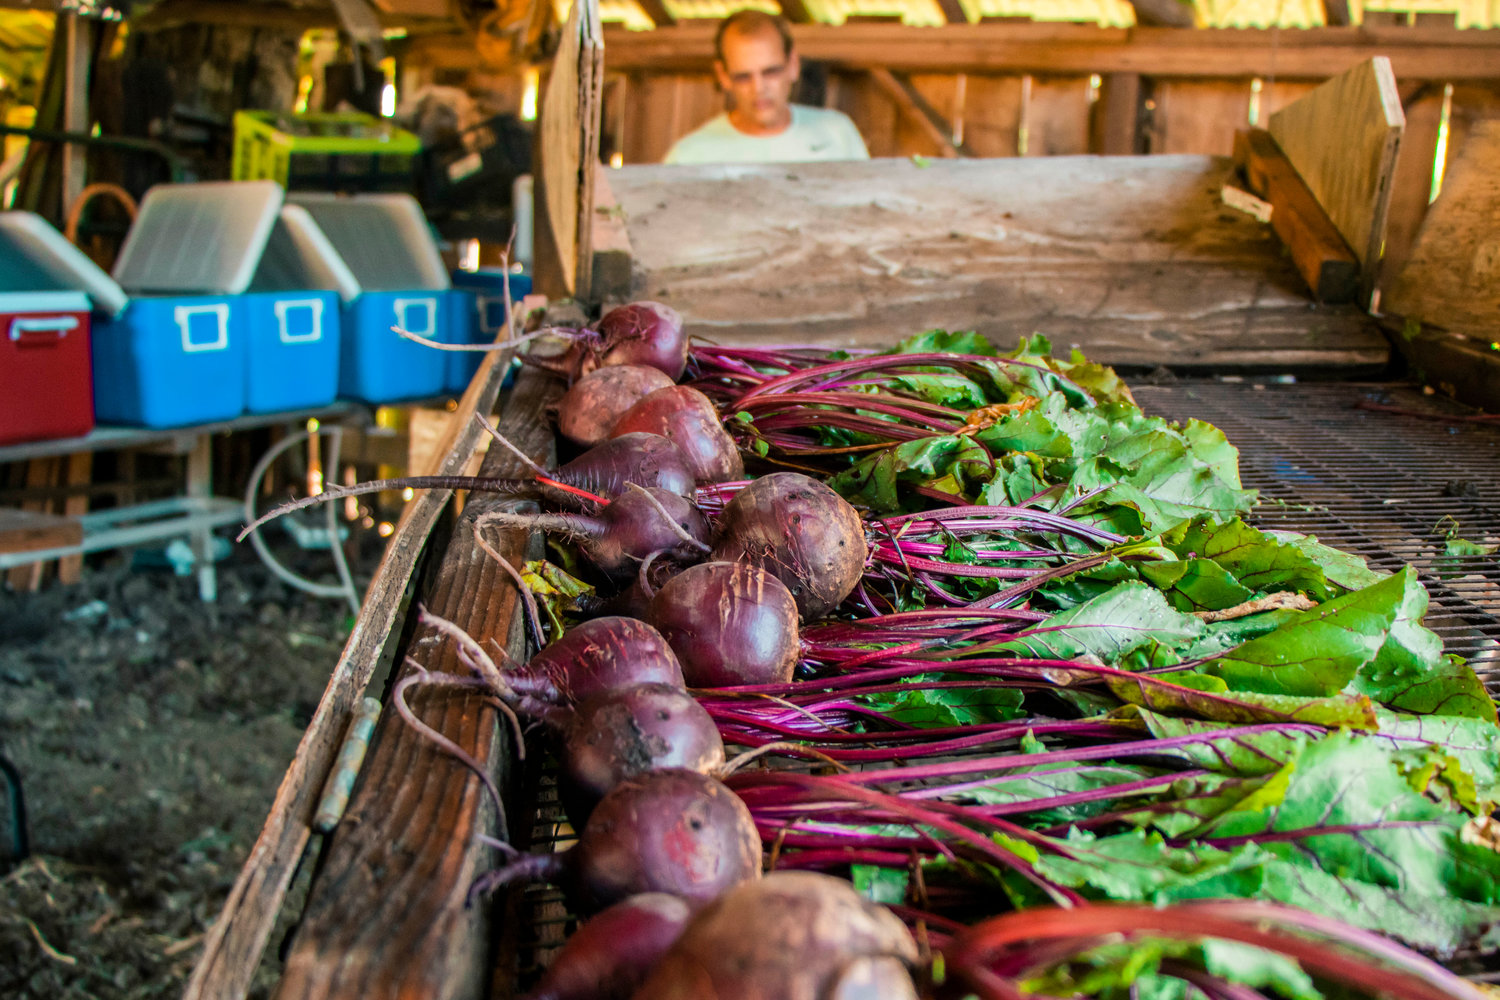 Beets sit on display Tuesday morning at Olequa Farm in Winlock.